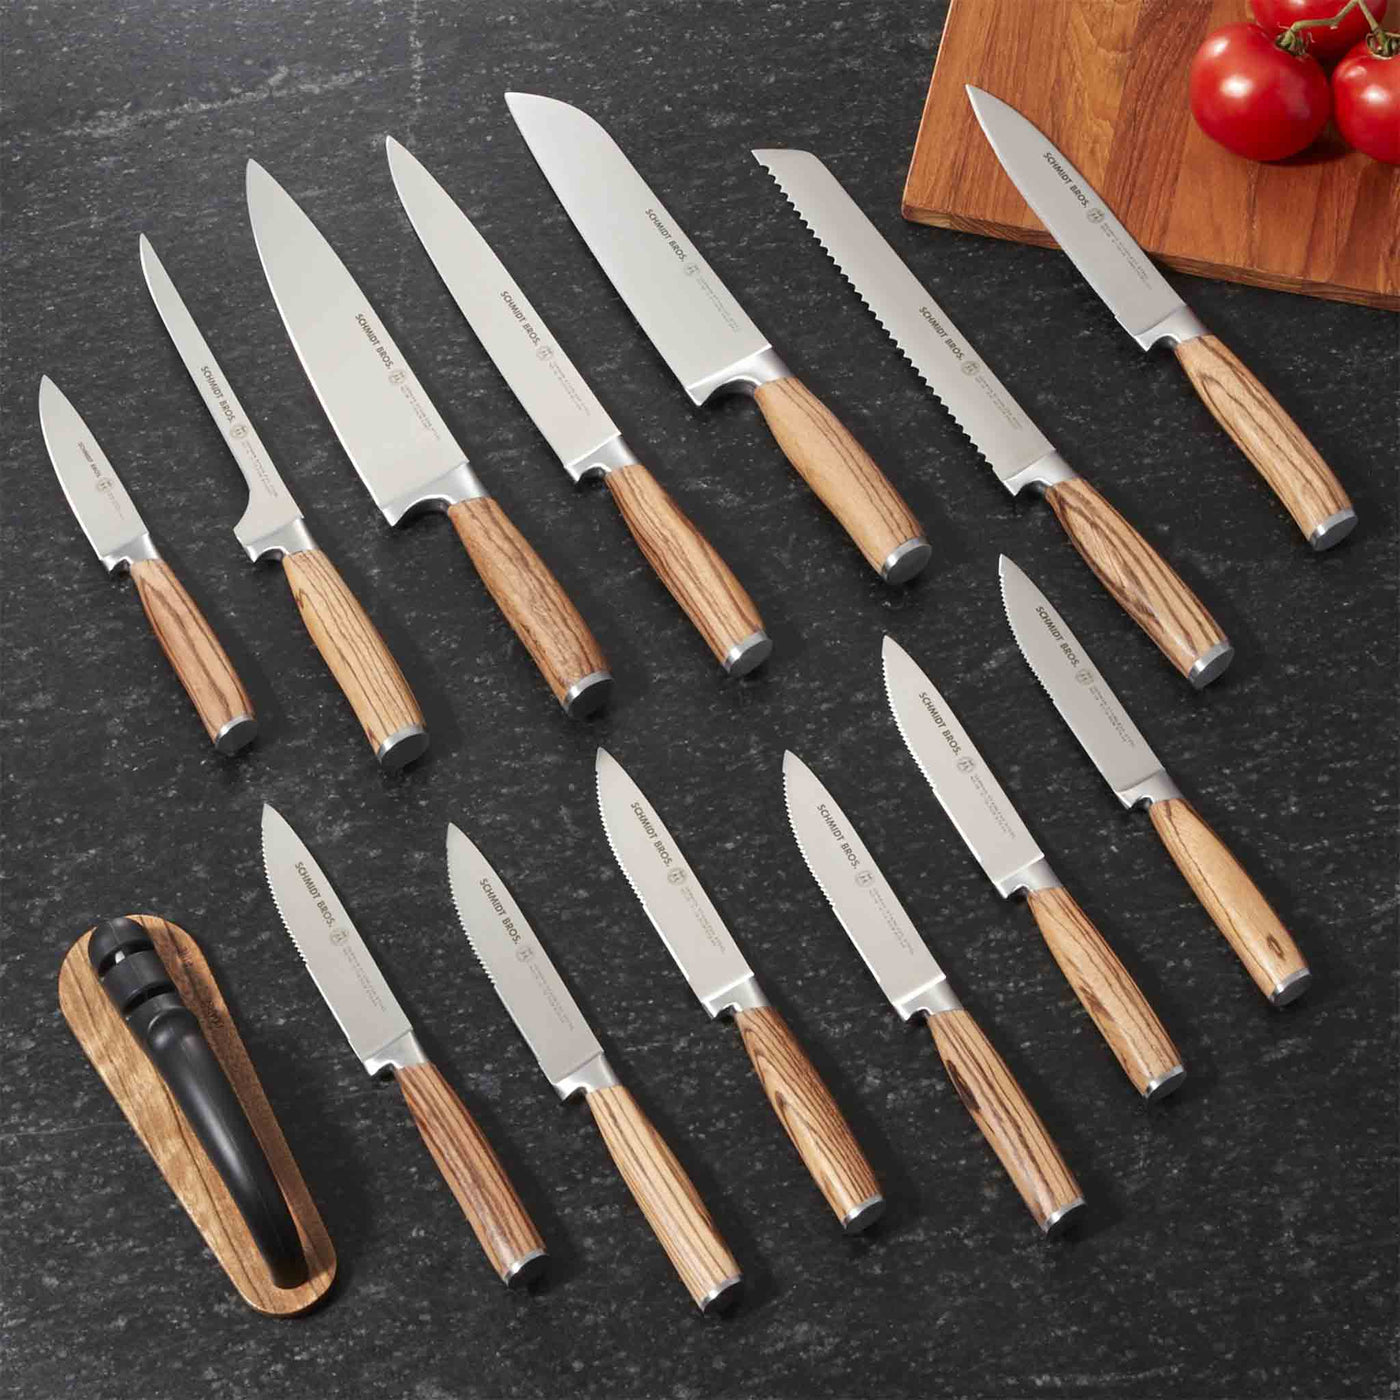 https://schmidtbrothers.com/cdn/shop/products/schmidt-brothers-kitchen-cutlery-schmidt-brothers-zebra-wood-15-piece-knife-set-high-carbon-stainless-steel-cutlery-with-zebra-wood-magnetic-knife-block-and-knife-sharpener-2829465835_1400x.jpg?v=1683912303